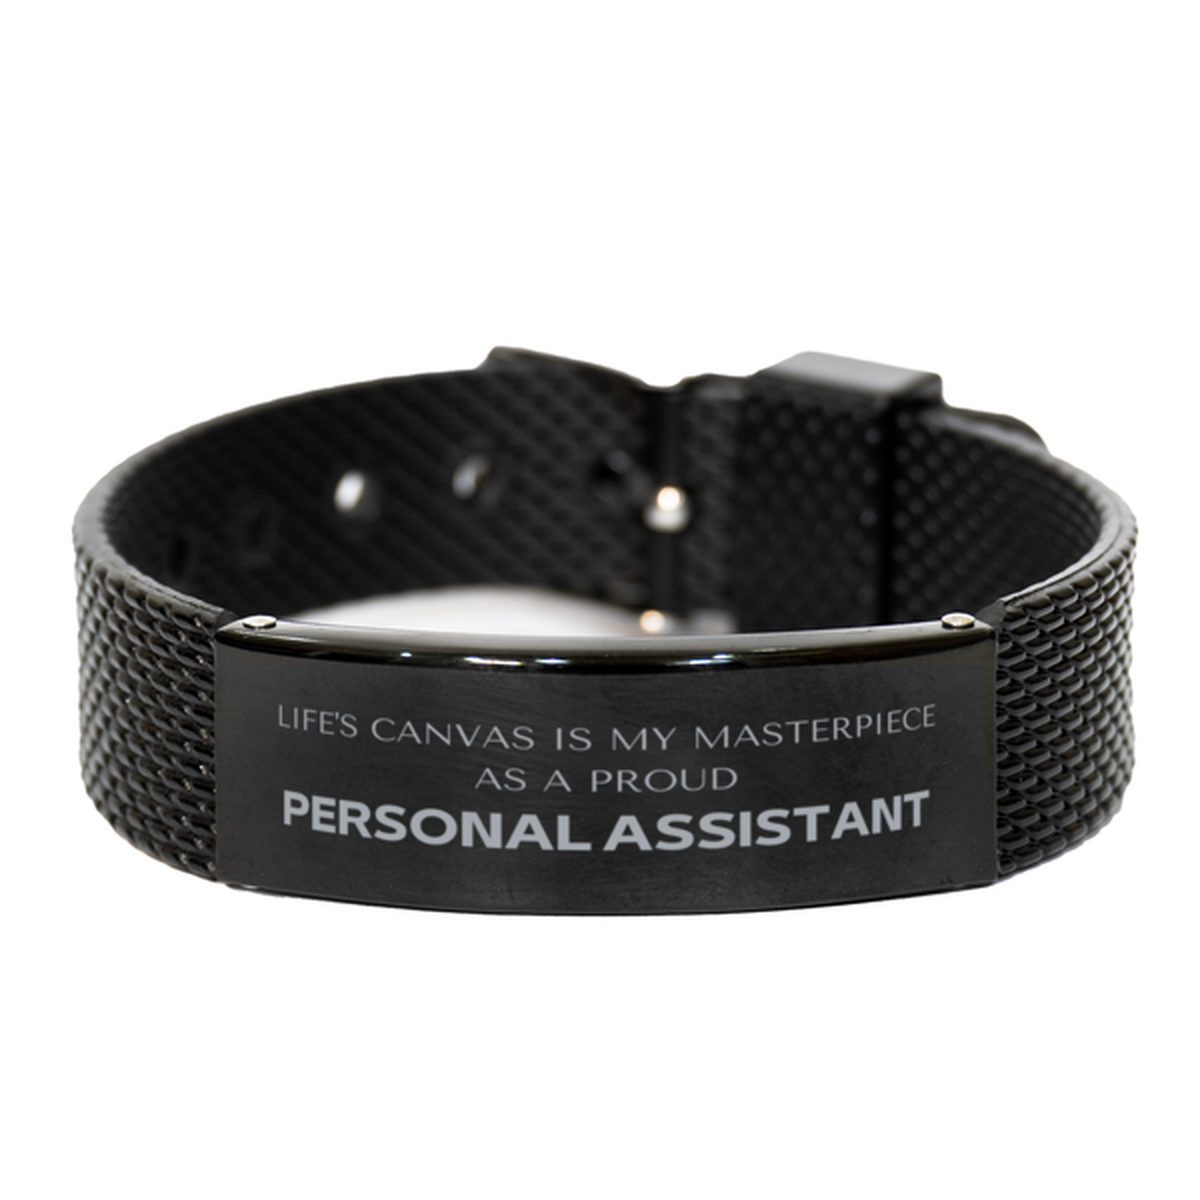 Proud Personal Assistant Gifts, Life's canvas is my masterpiece, Epic Birthday Christmas Unique Black Shark Mesh Bracelet For Personal Assistant, Coworkers, Men, Women, Friends